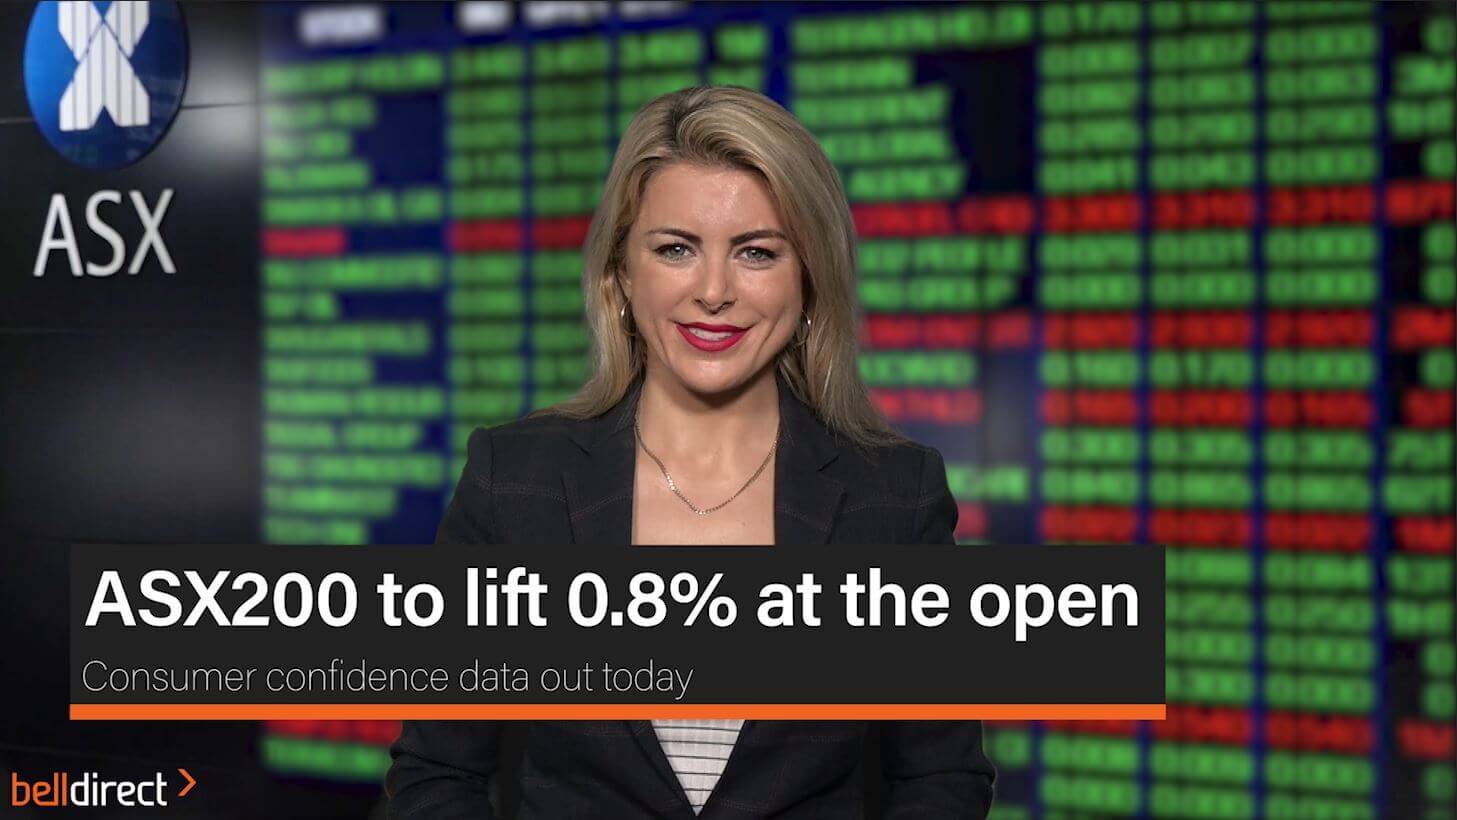 ASX200 set to lift 0.8% at the open